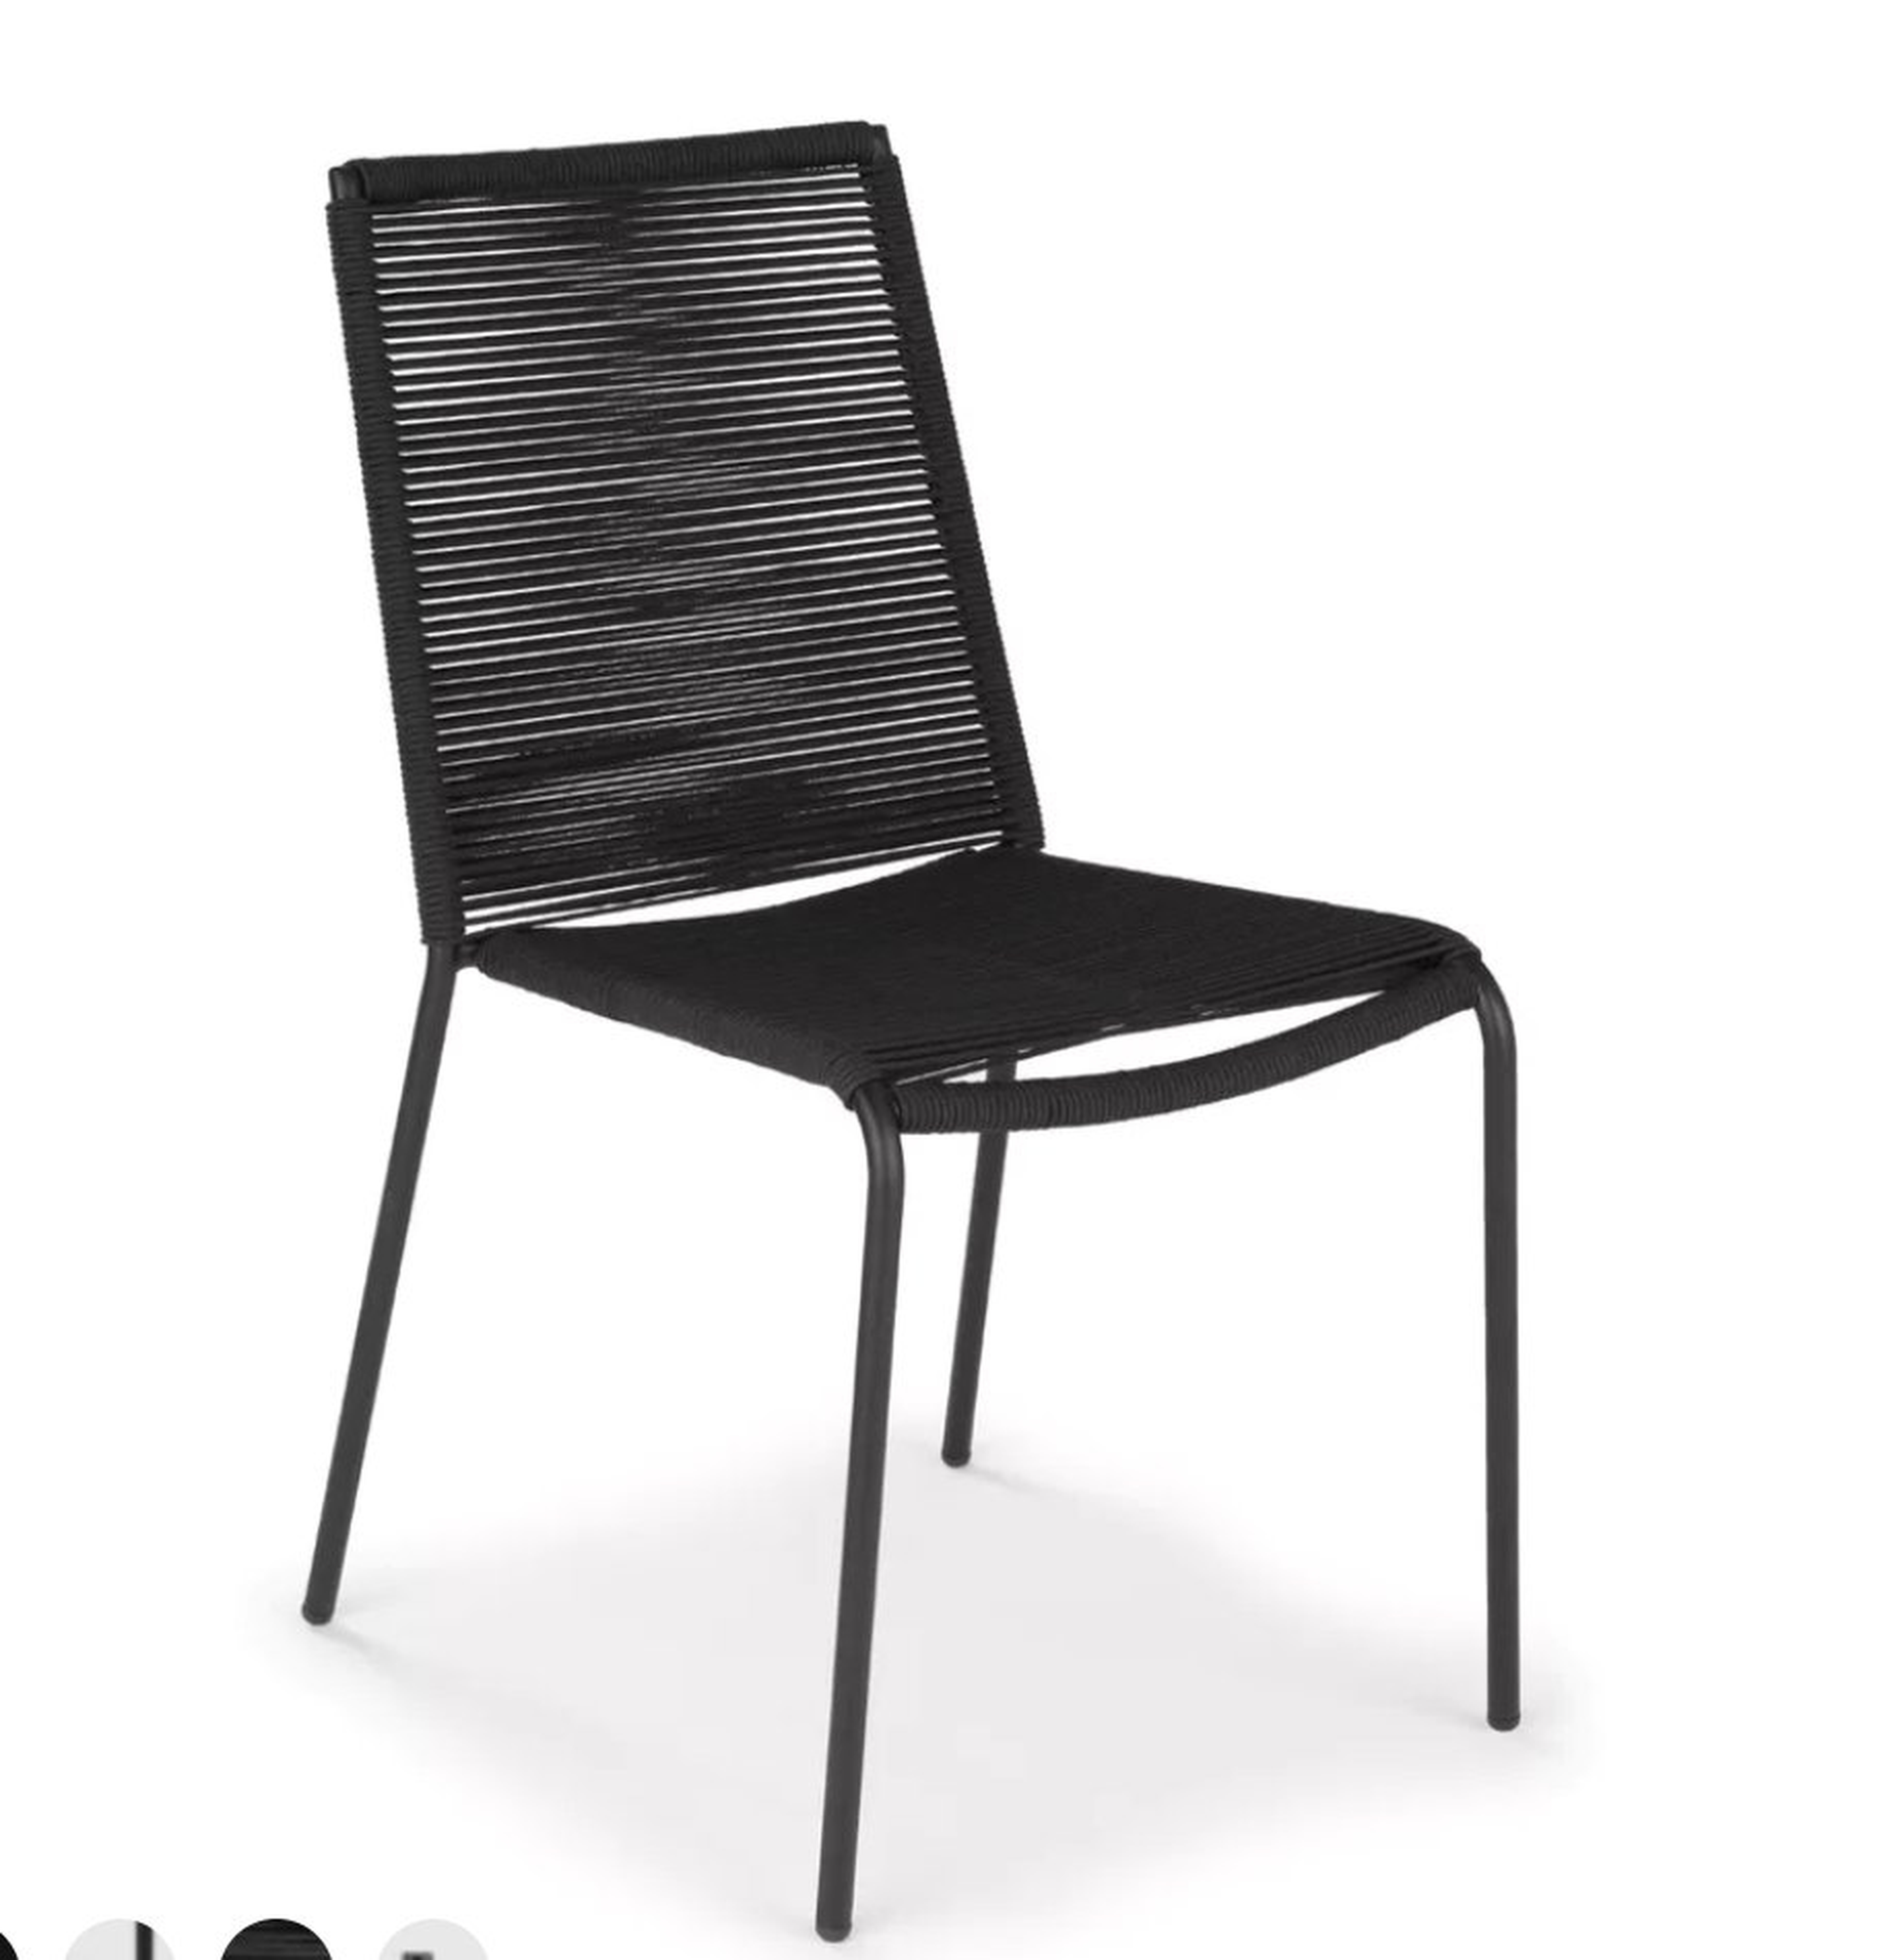 Zina Dining chair Black, Set of 2 - Article